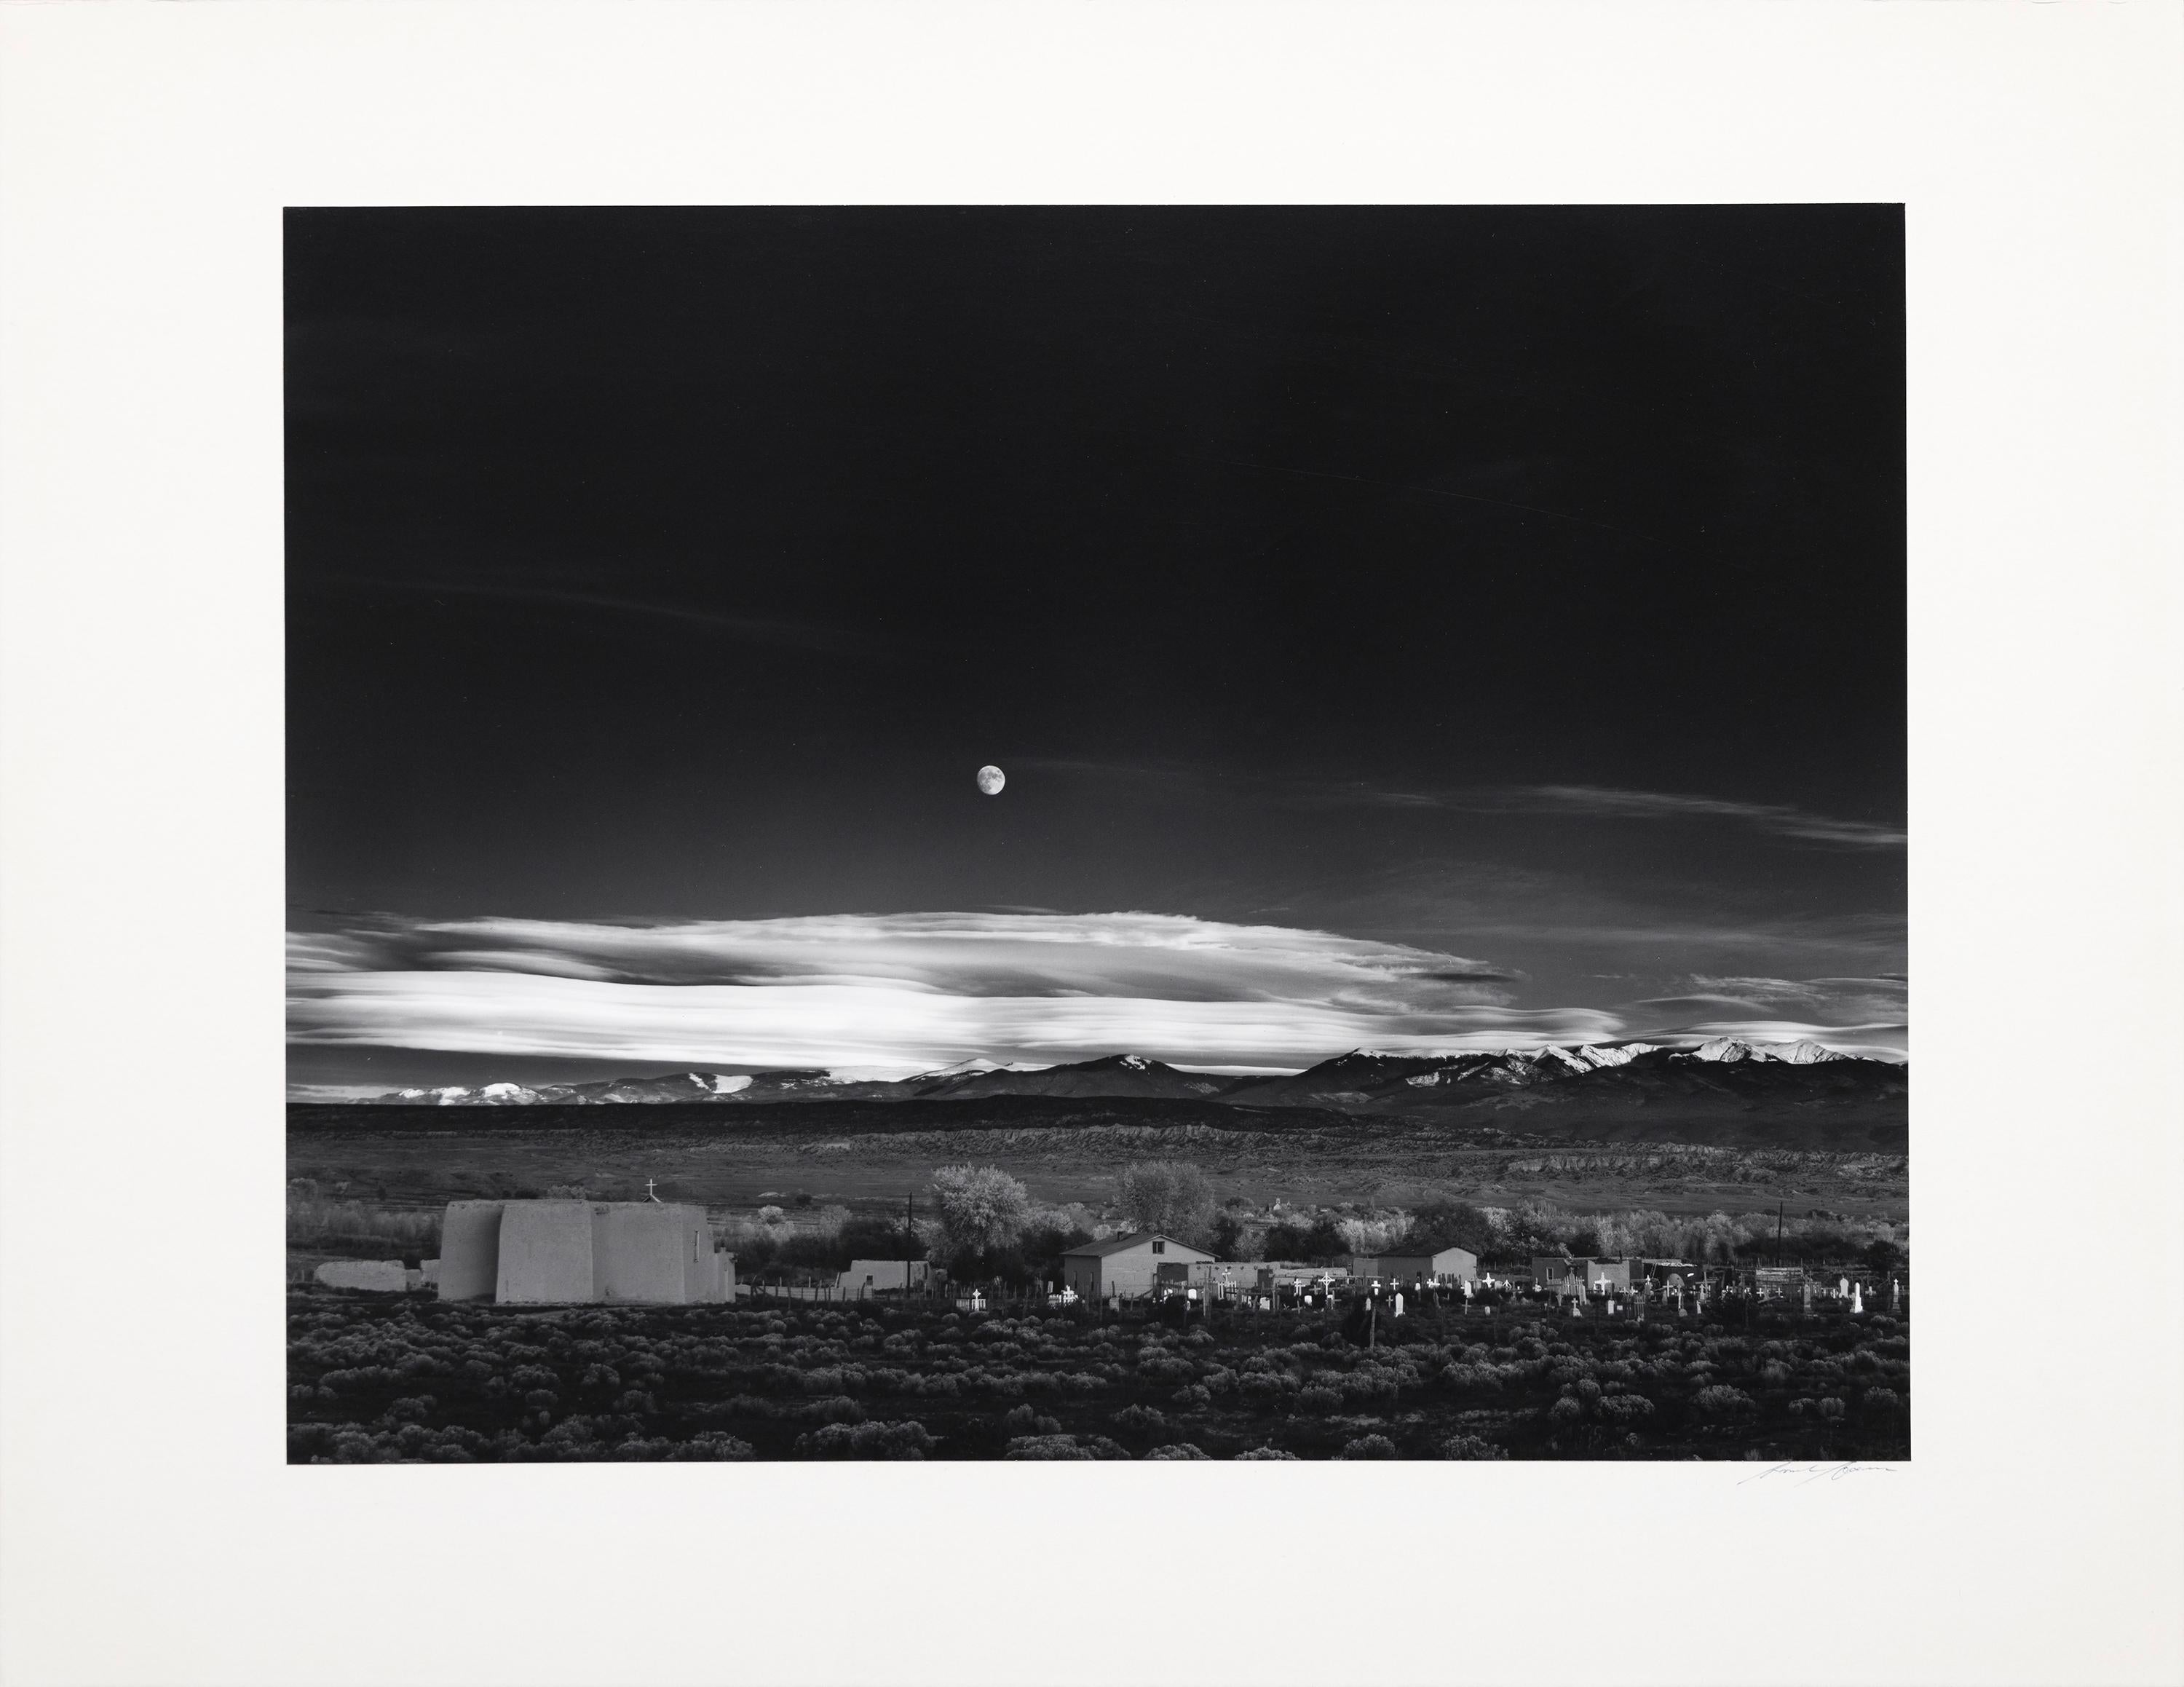 Moonrise, Hernandez, New Mexico - Photograph by Ansel Adams